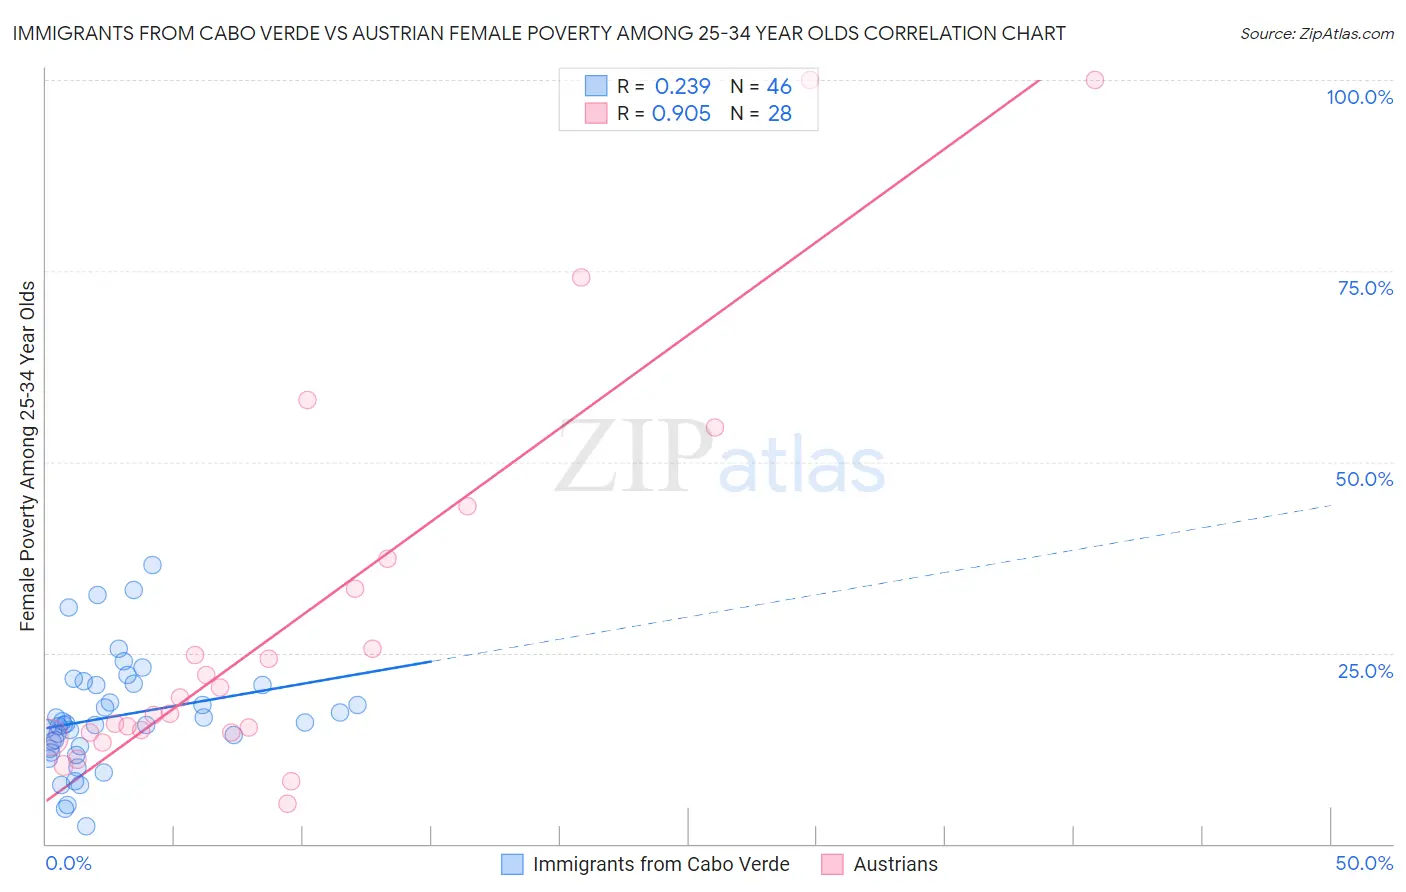 Immigrants from Cabo Verde vs Austrian Female Poverty Among 25-34 Year Olds